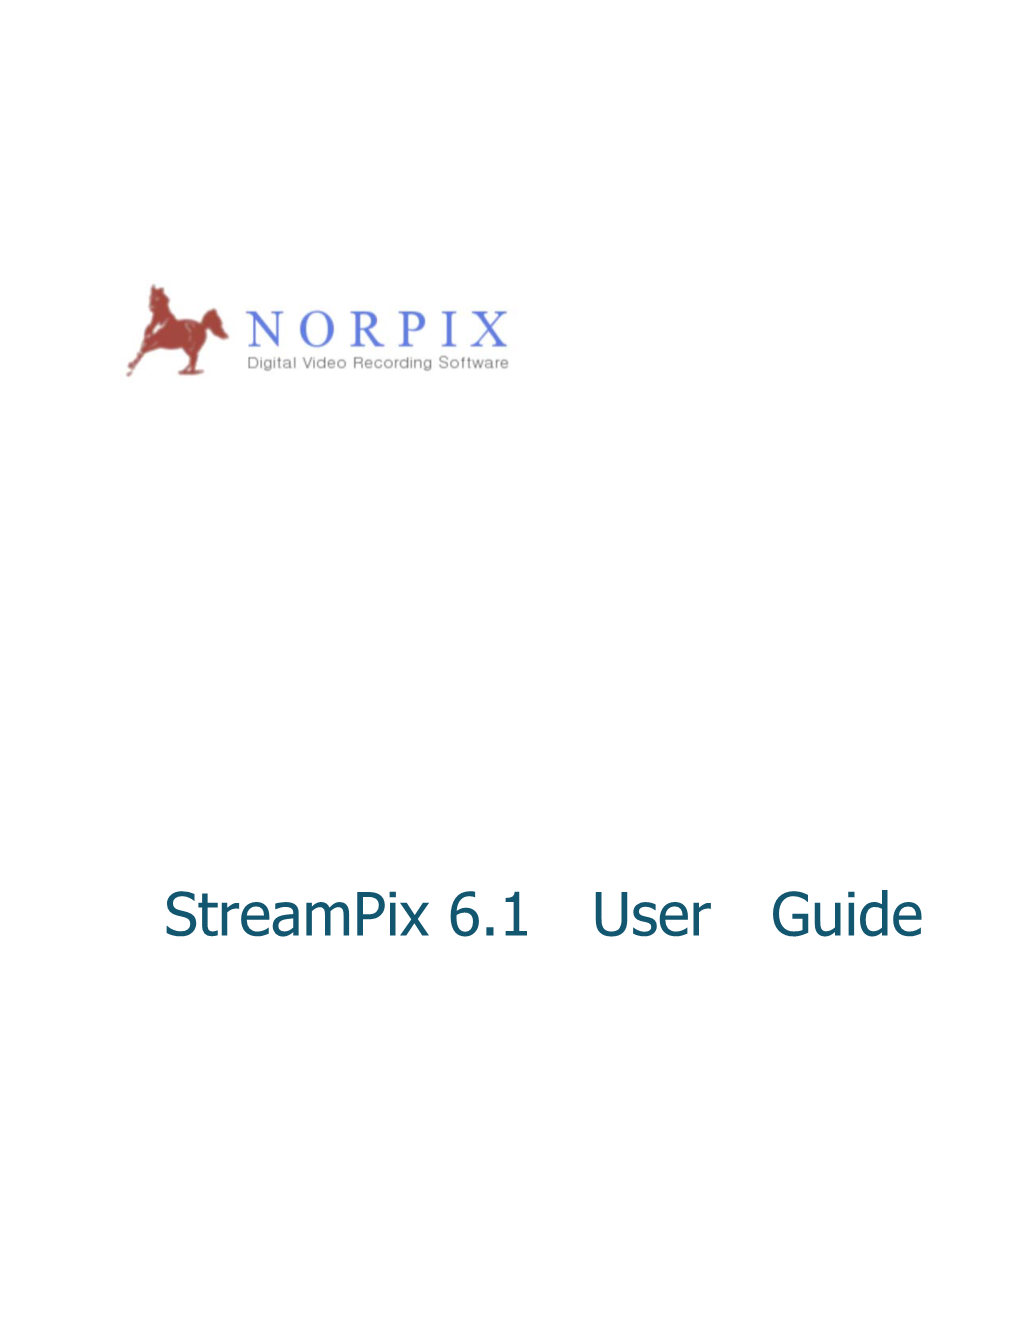 Streampix 6.1 User Guide COPYRIGHTS and DISCLAIMERS